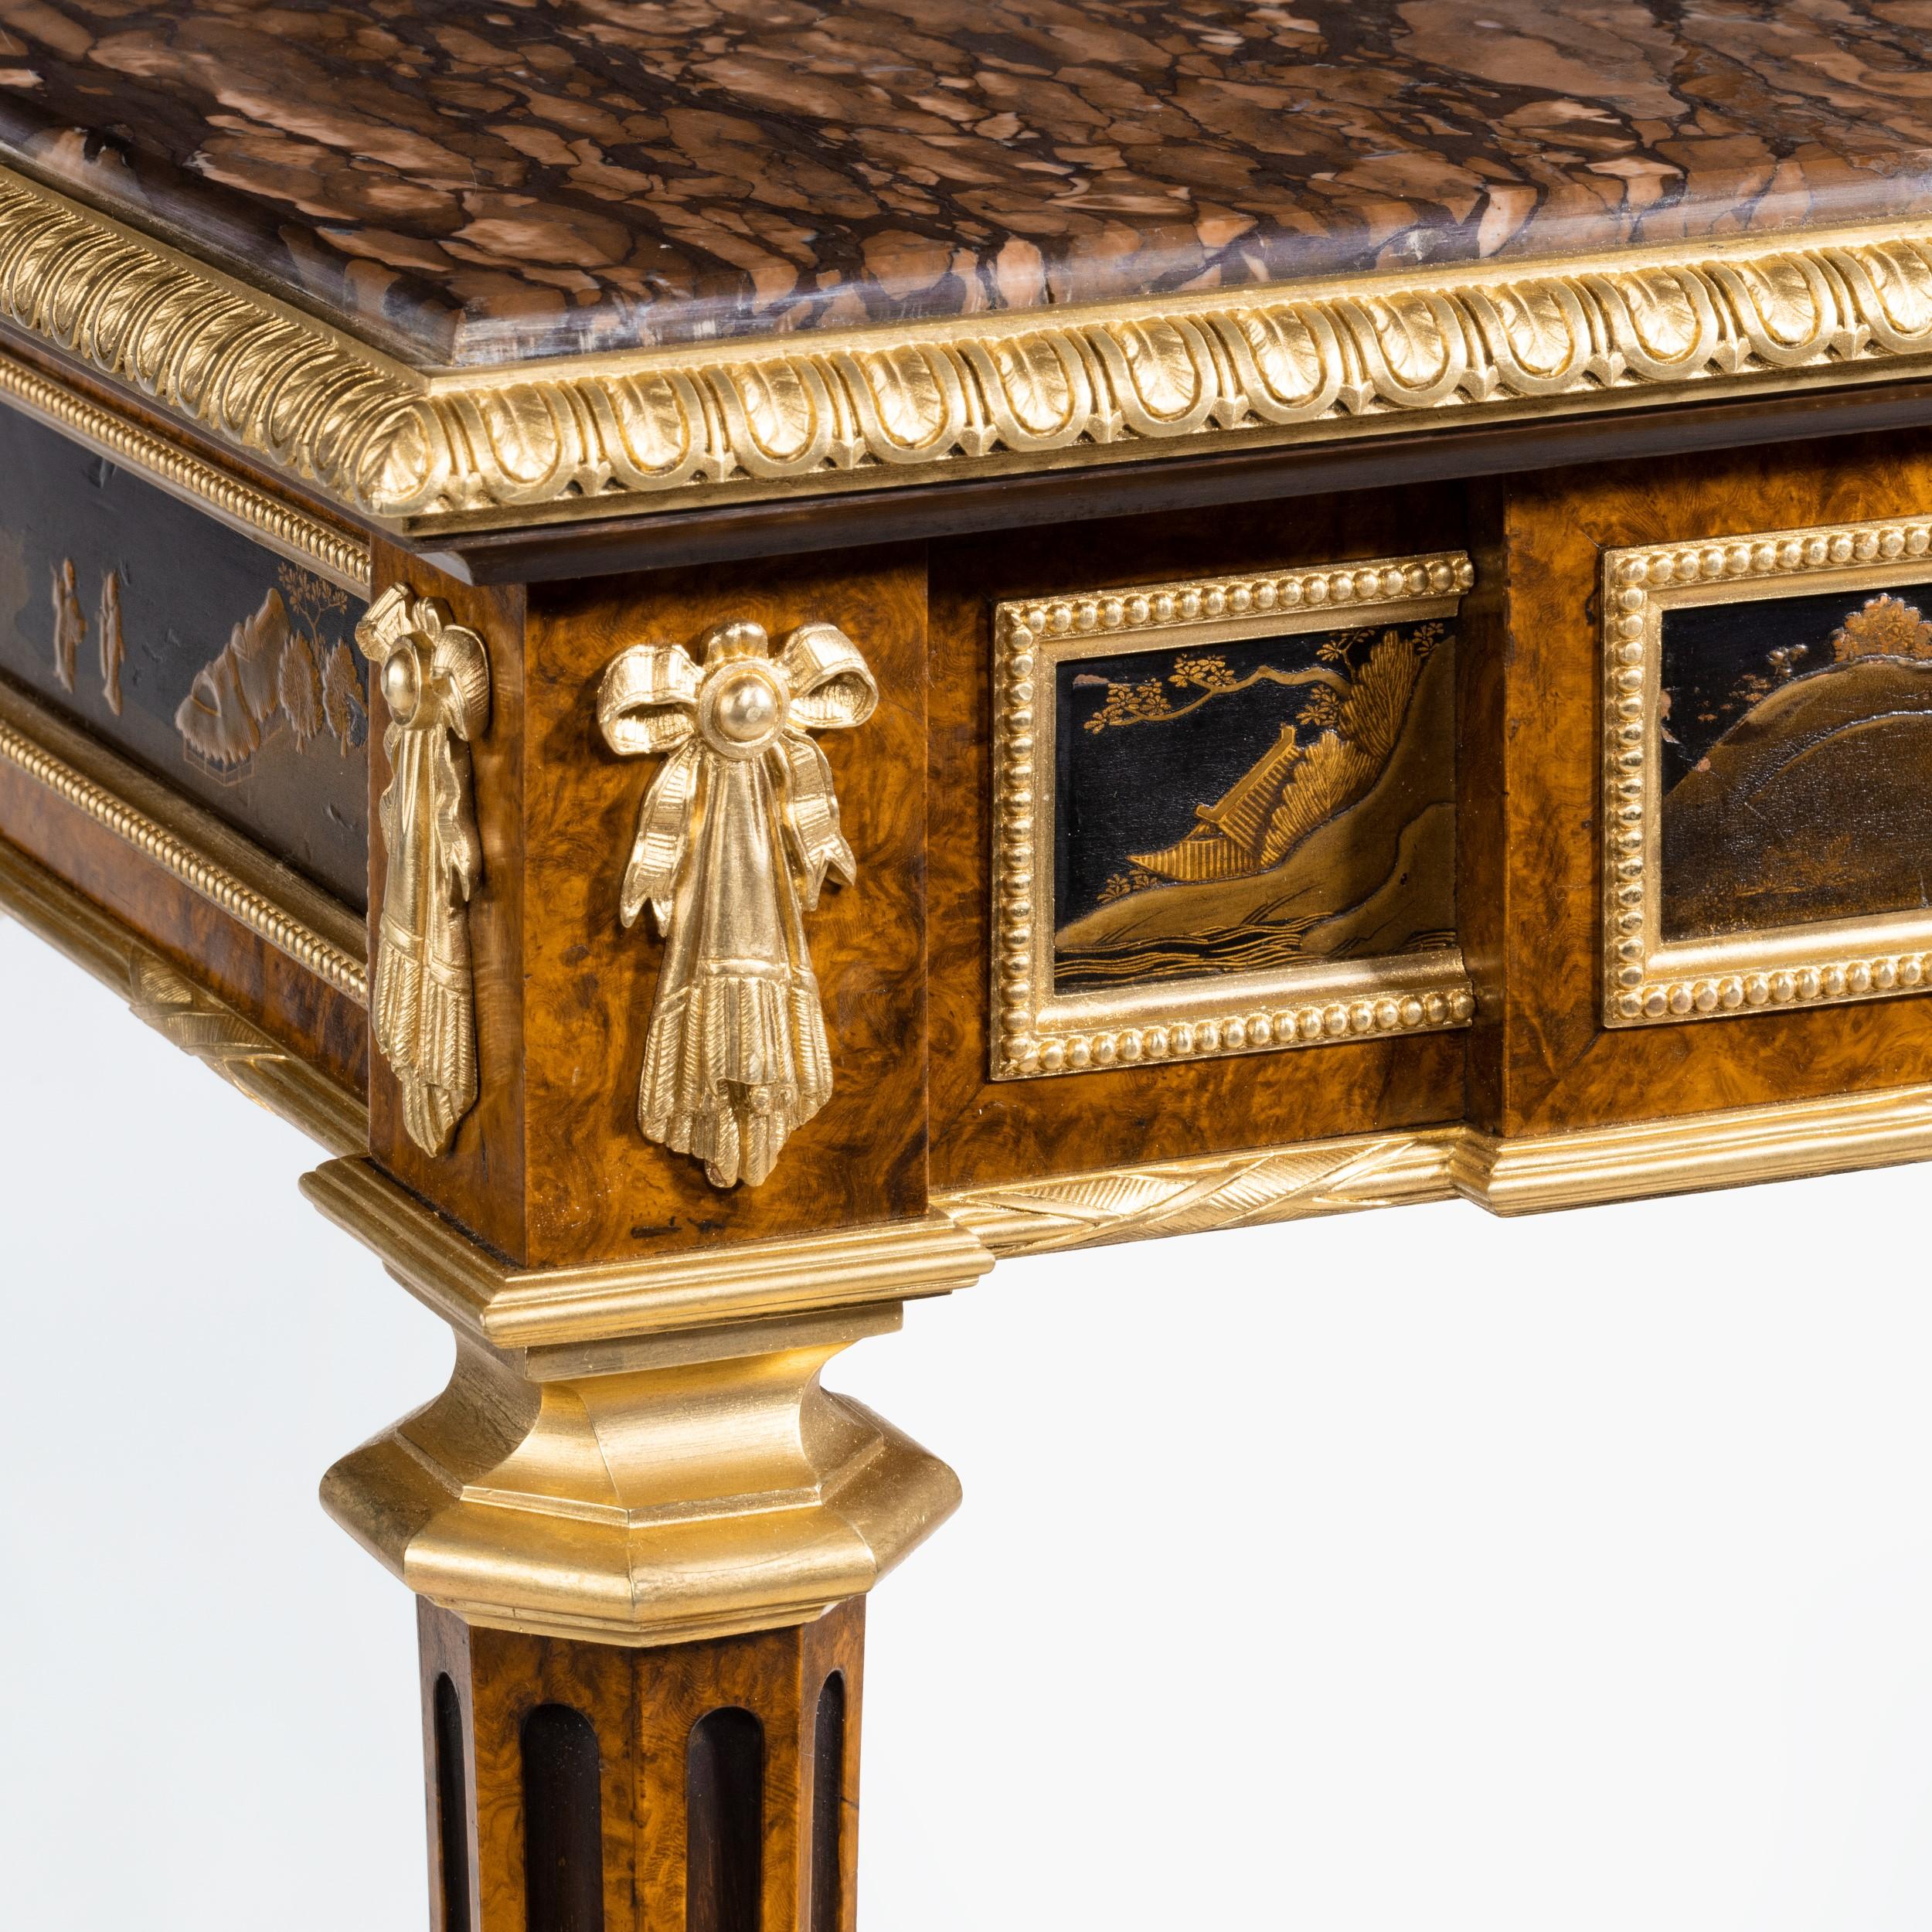 19th Century Antique Ormolu-Mounted Side Table in the Louis XVI Manner by Henry Dasson